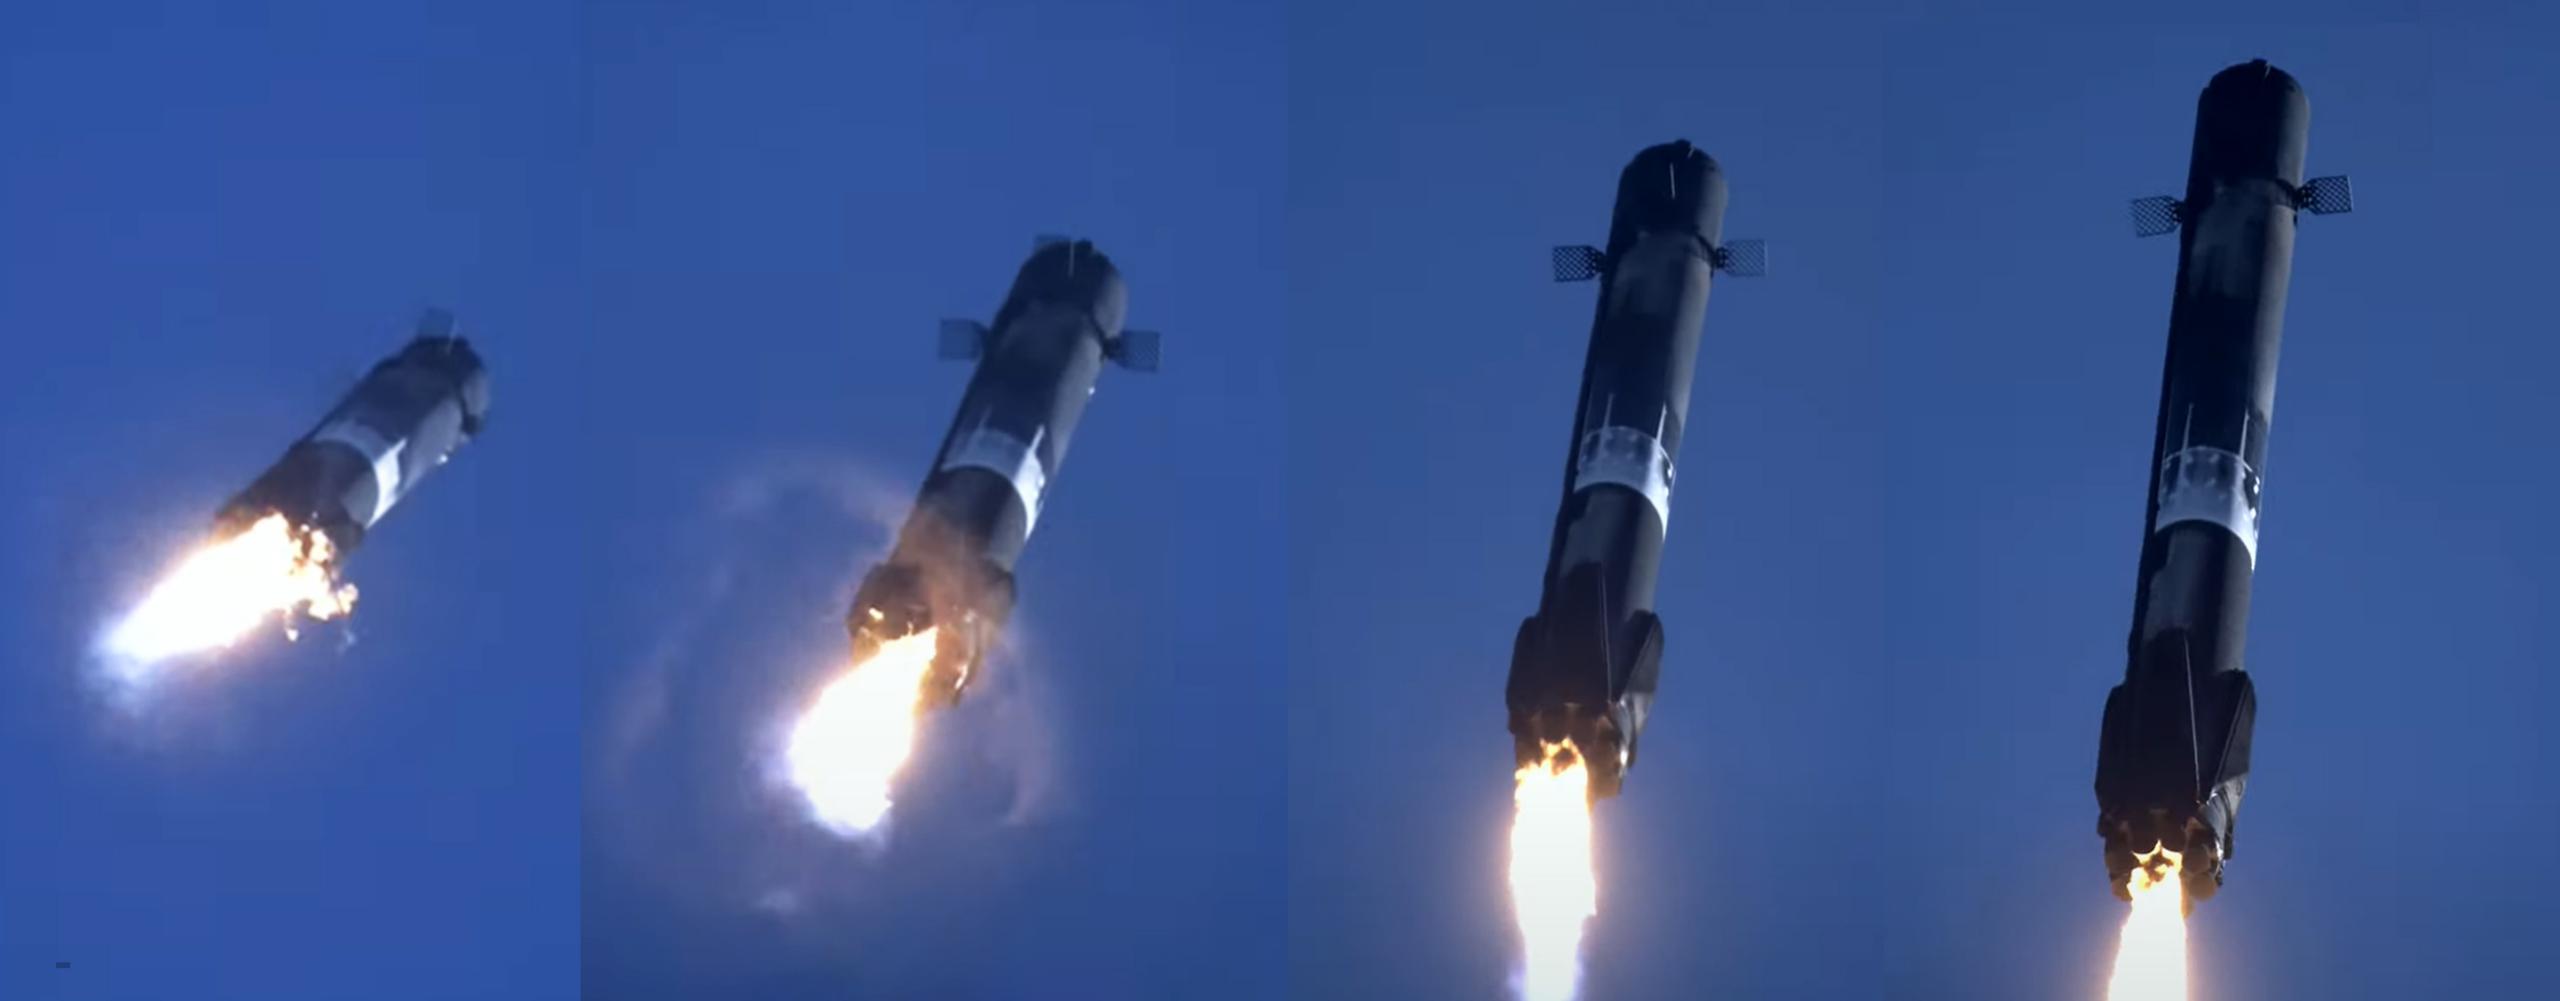 Transporter-3 F9 B1058 LC-40 webcast 011322 (SpaceX) landing feature 1 (c)